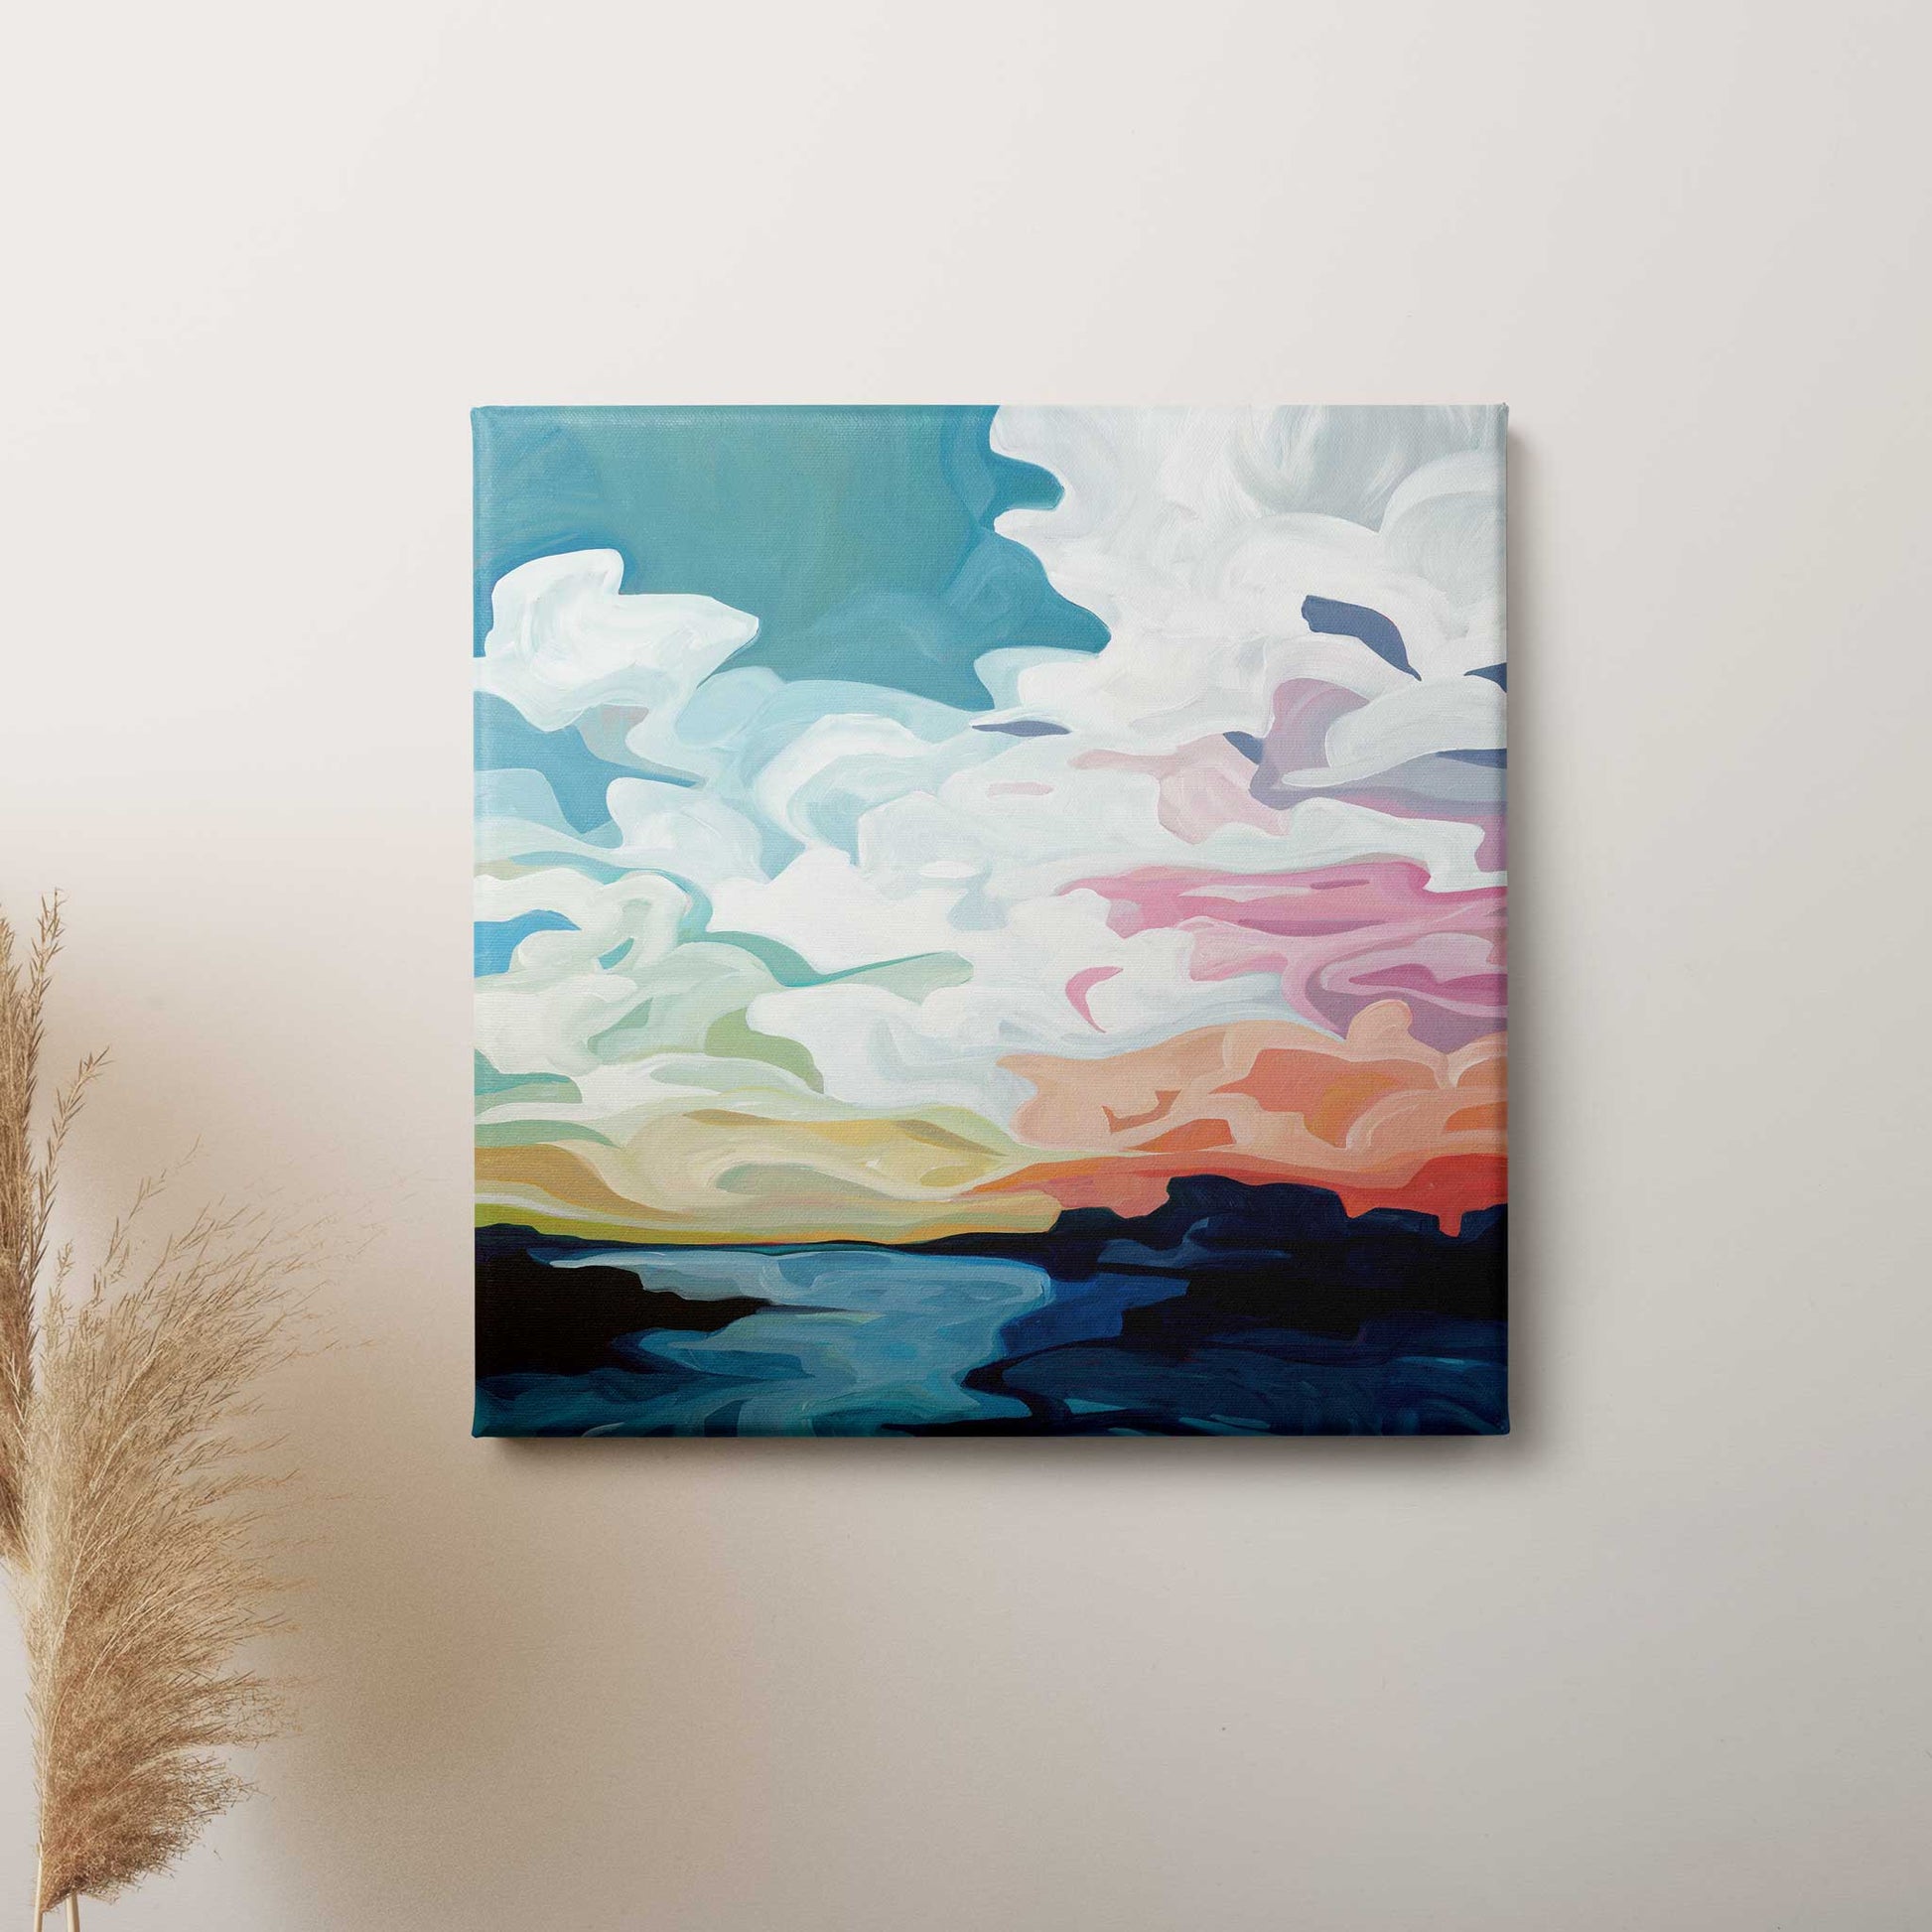 Canvas art print of an abstract autumn evening sky painting by Canadian abstract artist Susannah Bleasby